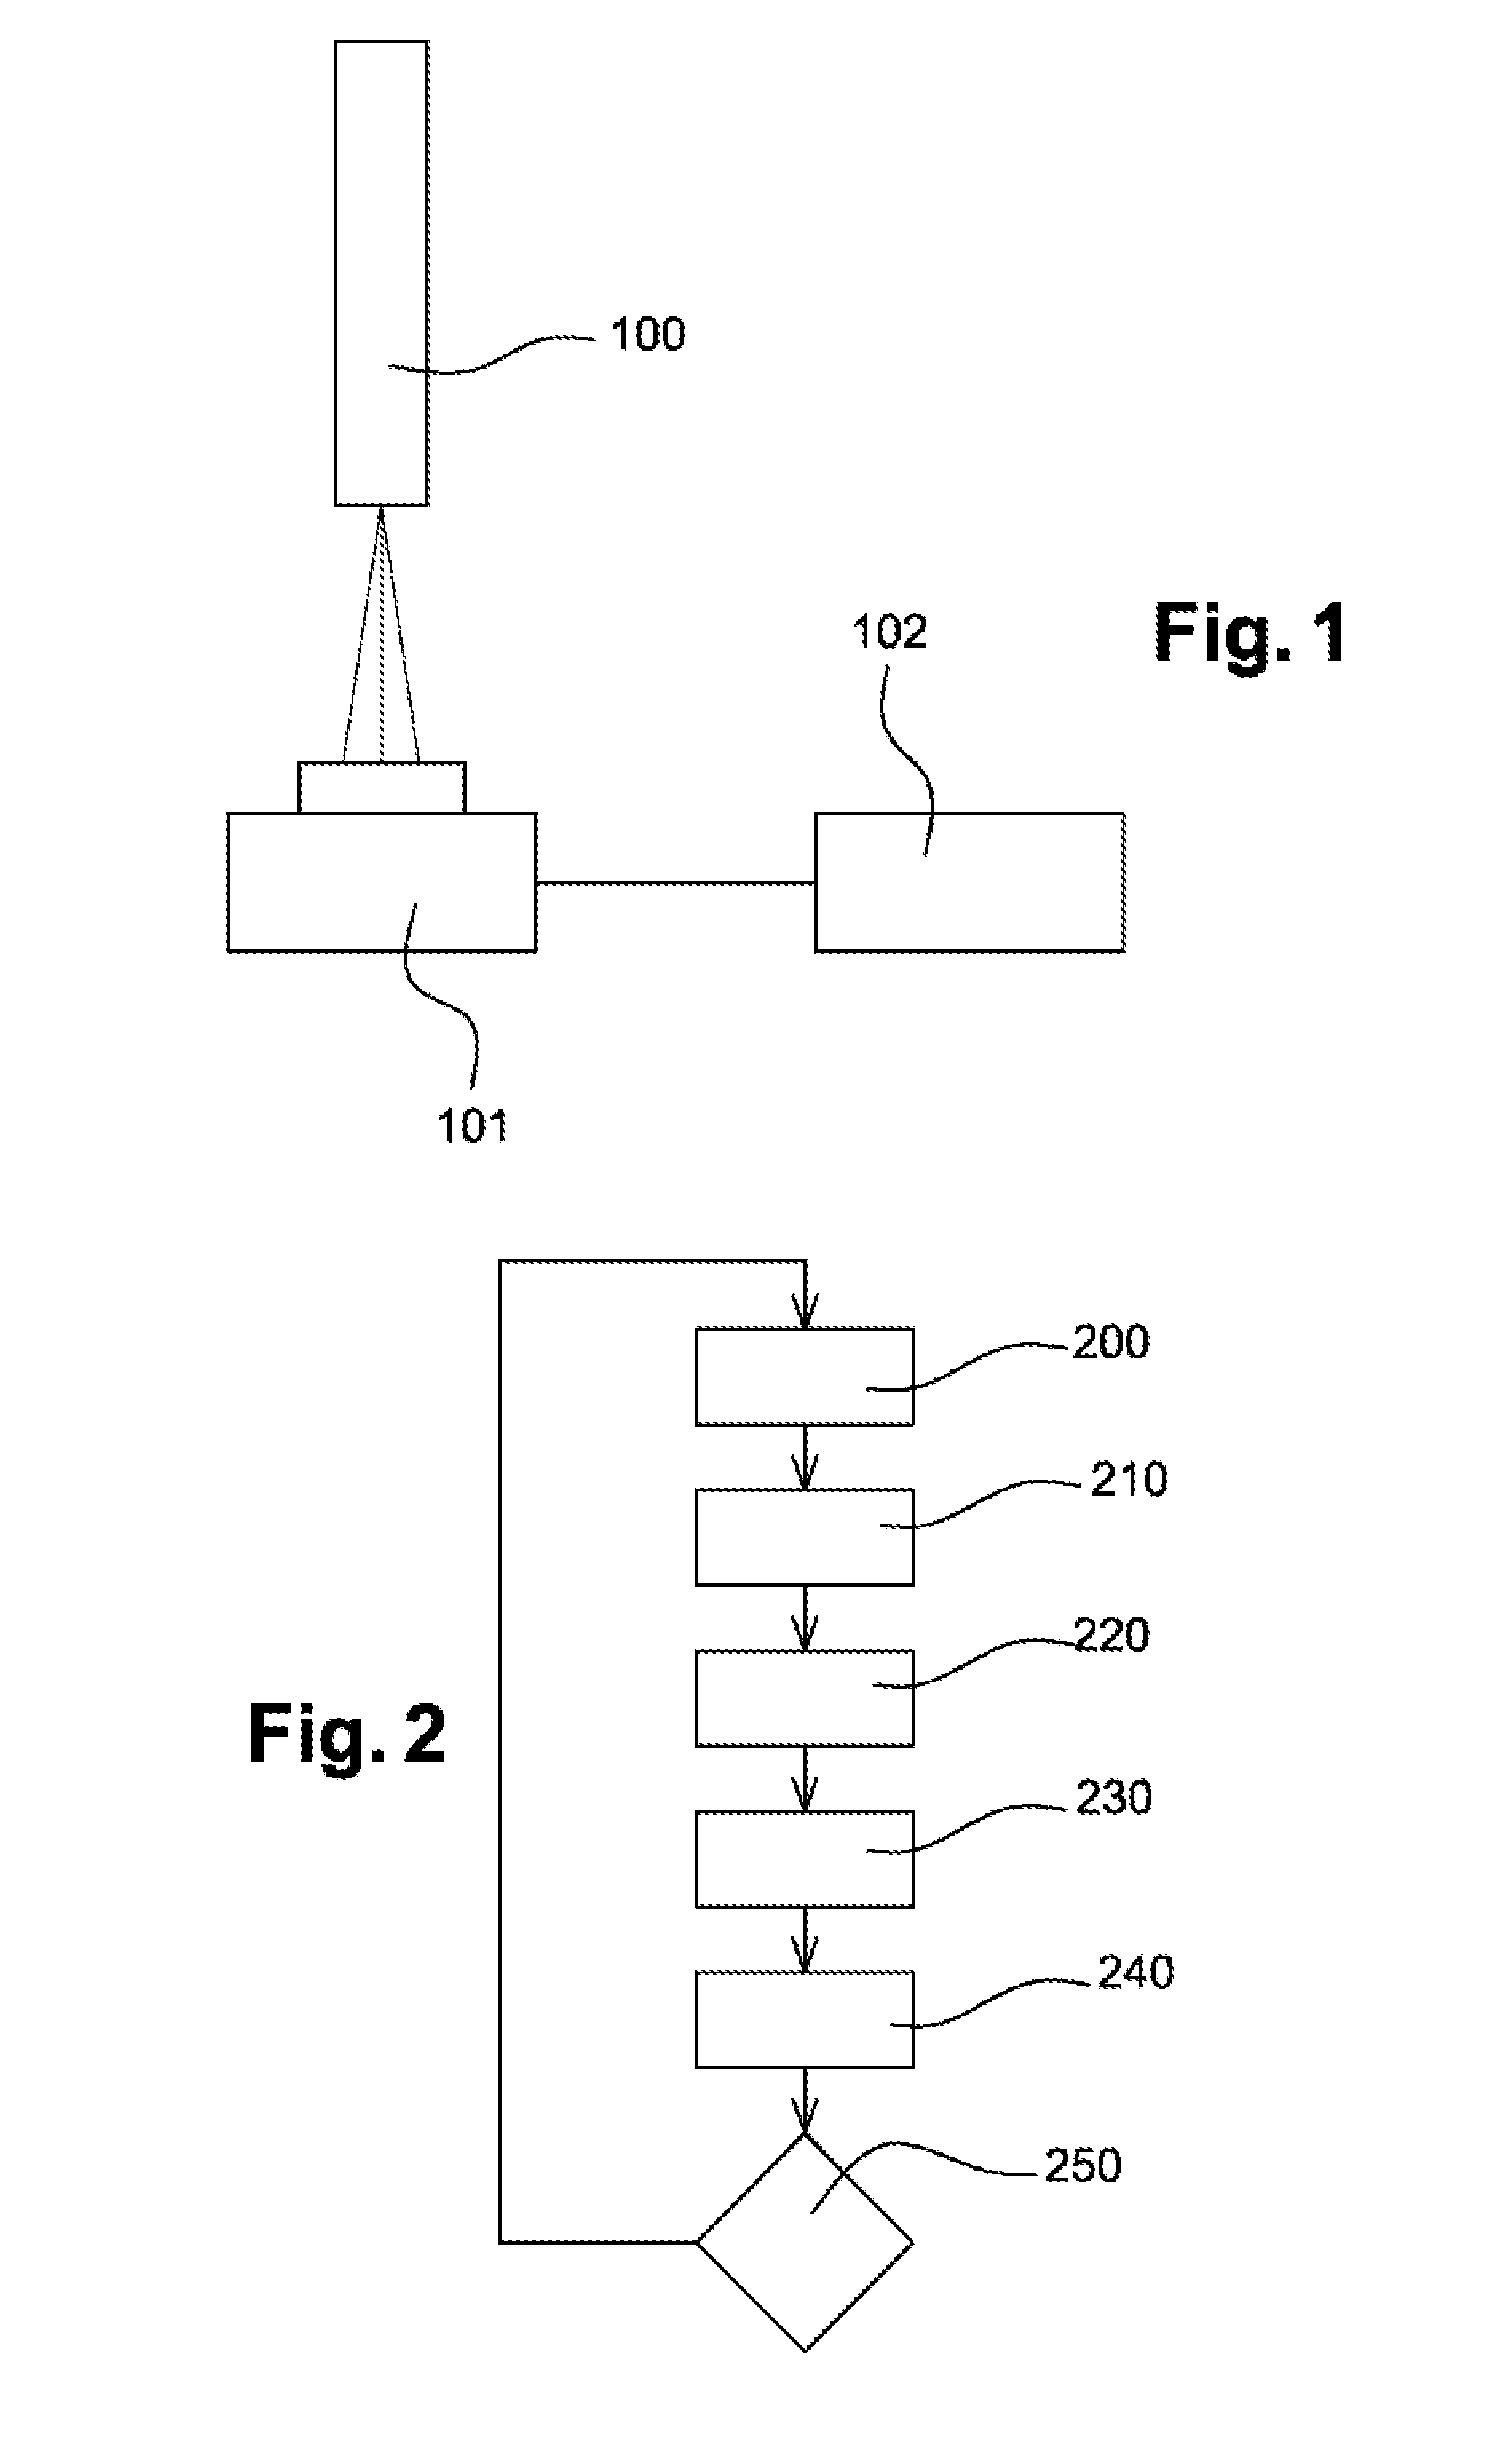 Method of characterizing the sensitivity of an electronic component subjected to irradiation conditions